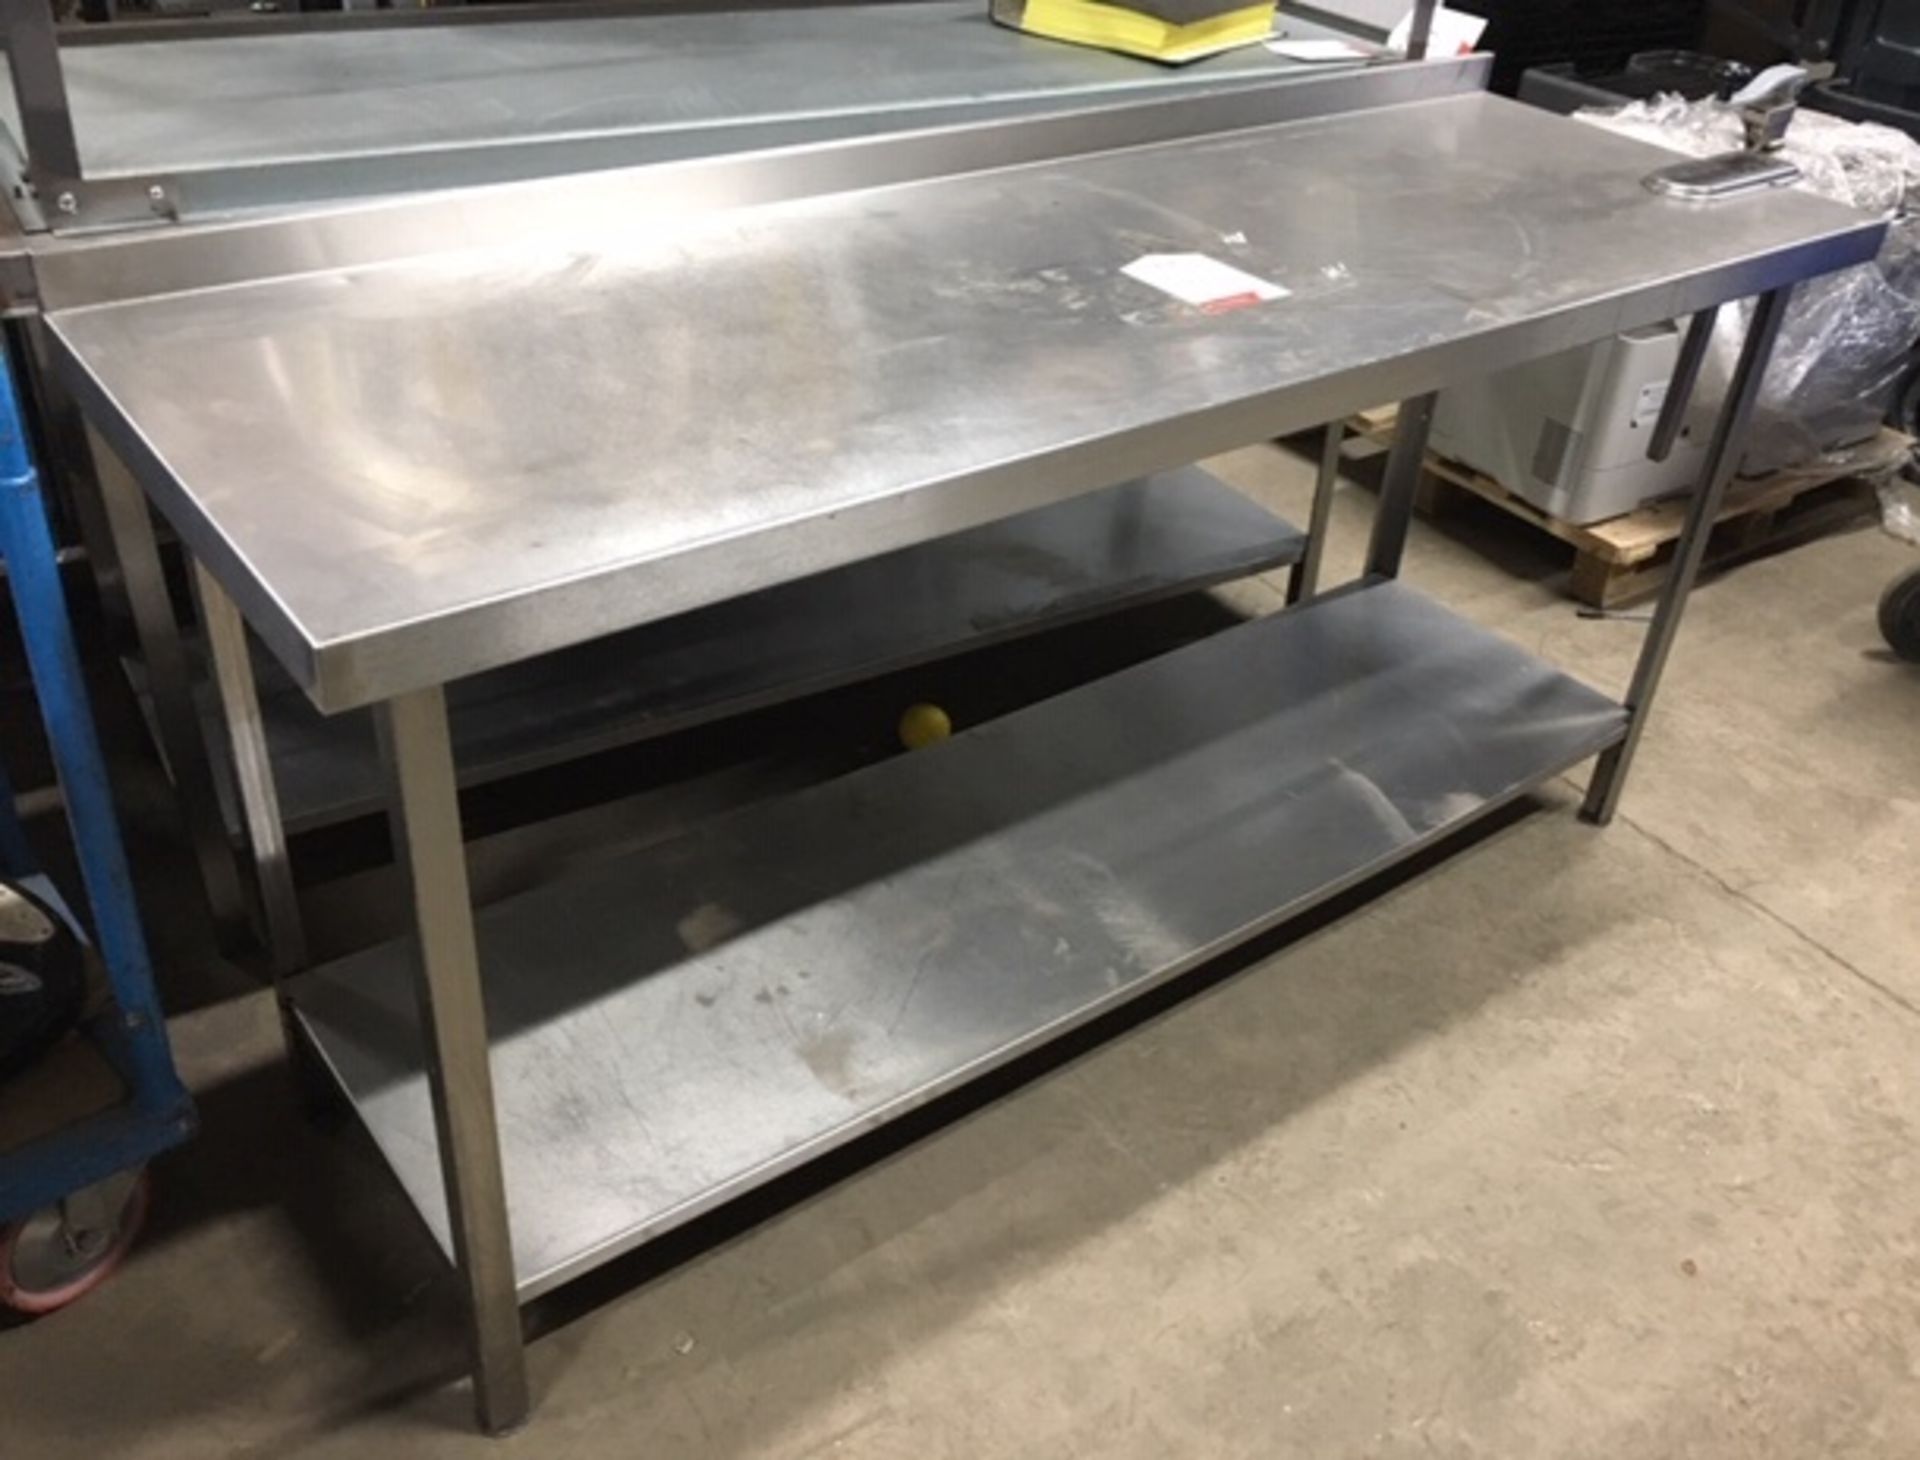 Stainless Steel Preparation Table W/ Can Opener Attachment & Undershelf